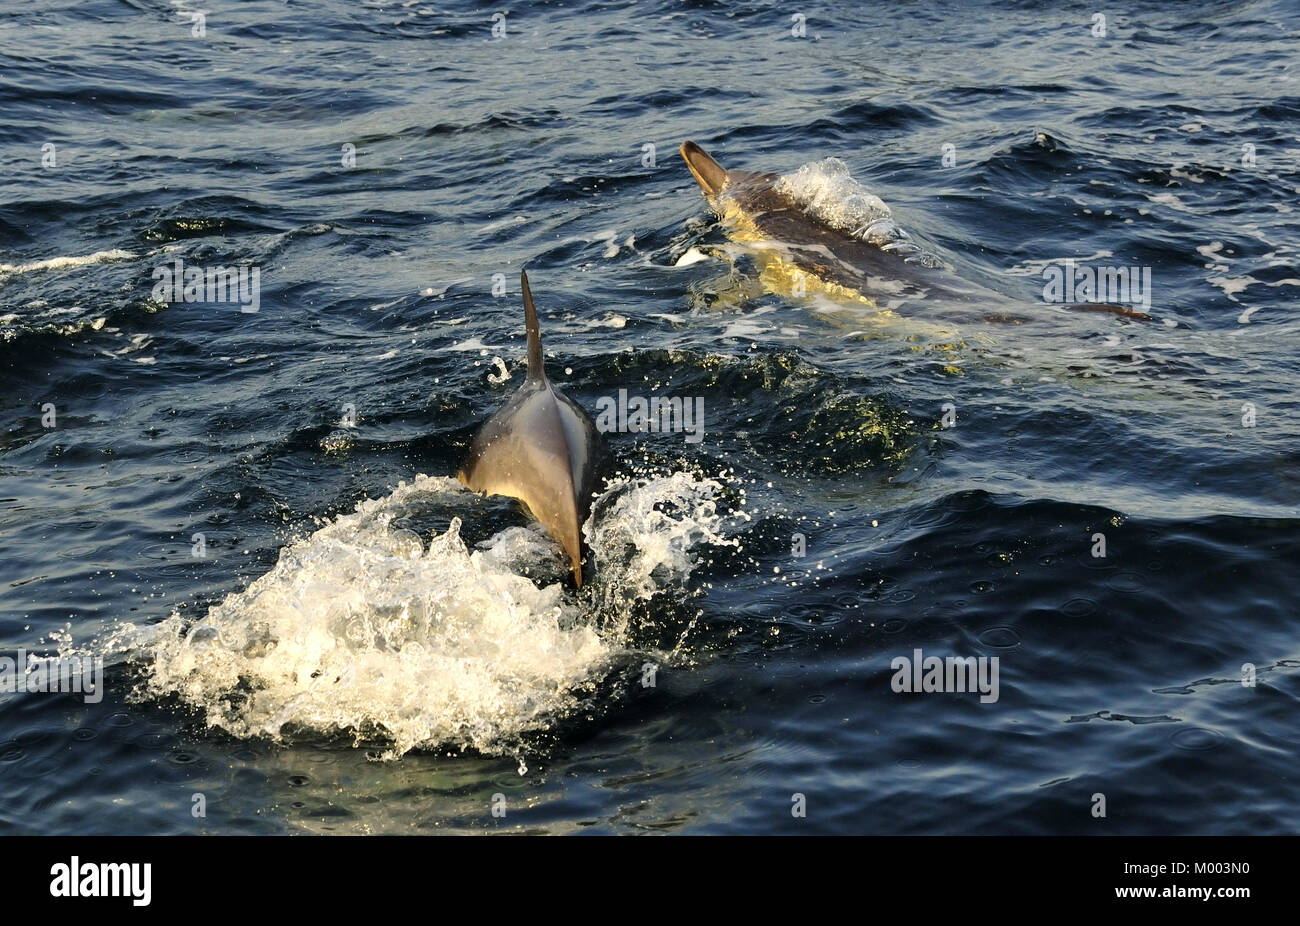 Dolphin (Delphinus capensis) swimming in the ocean. South Africa Stock Photo